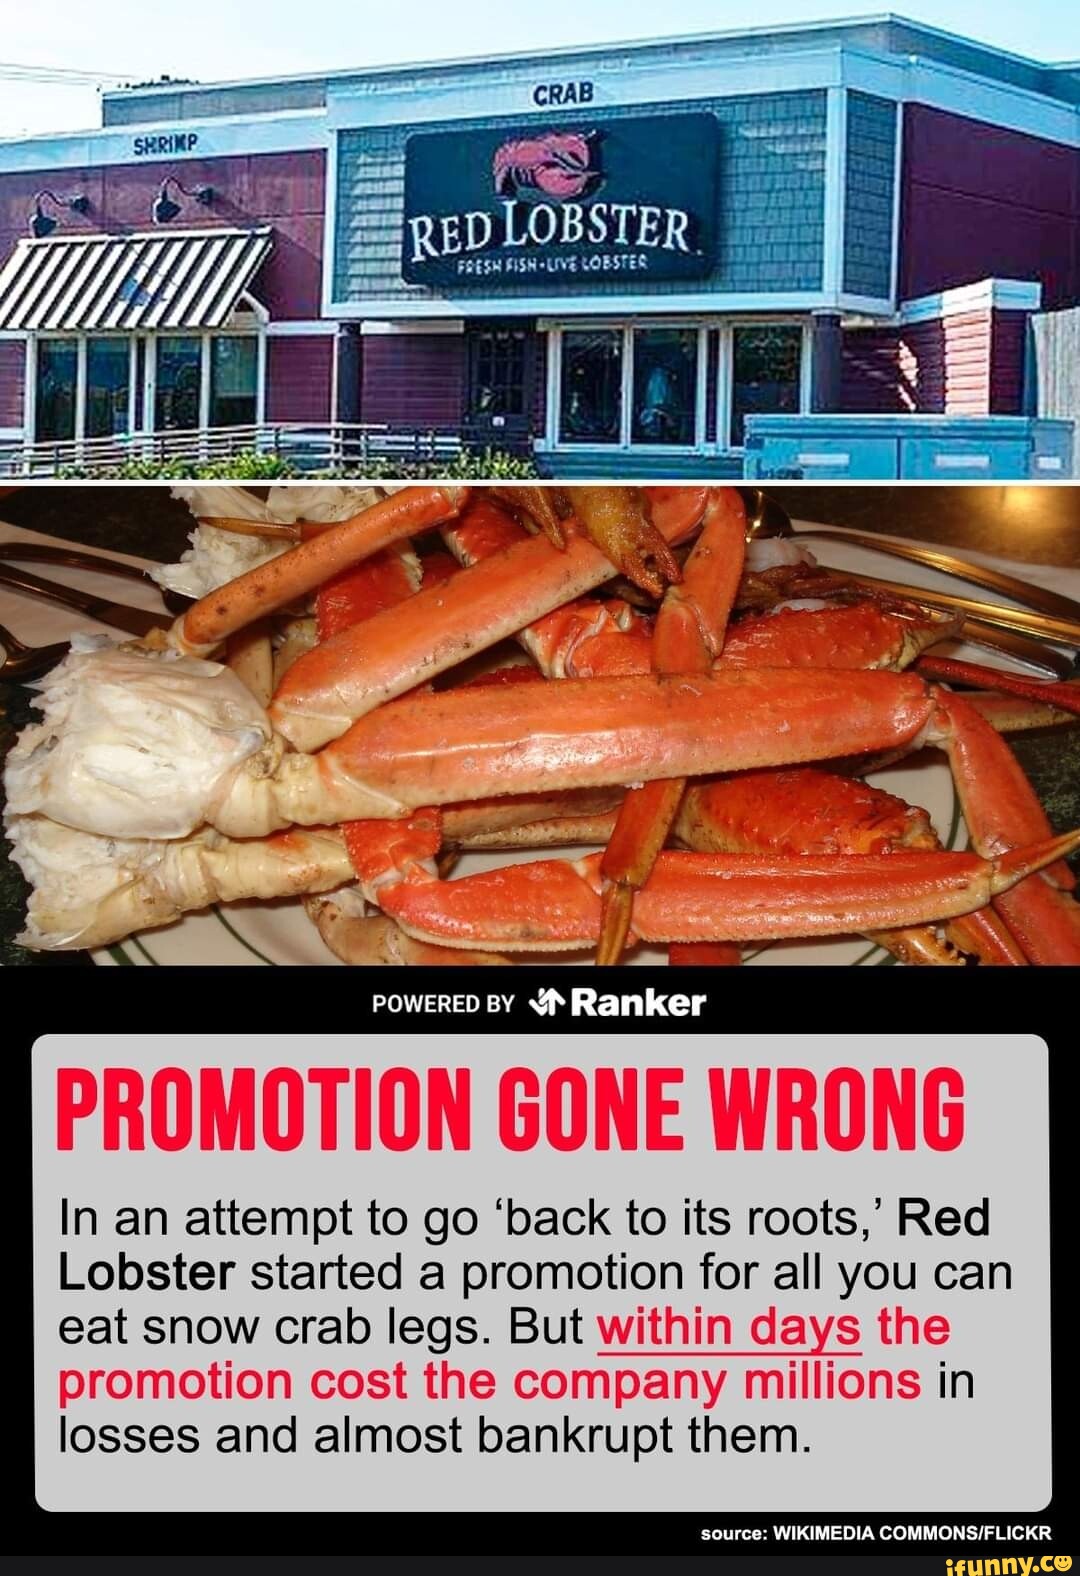 RED LOBSTER Ranker PROMOTION GONE WRONG In an attempt to go 'back to